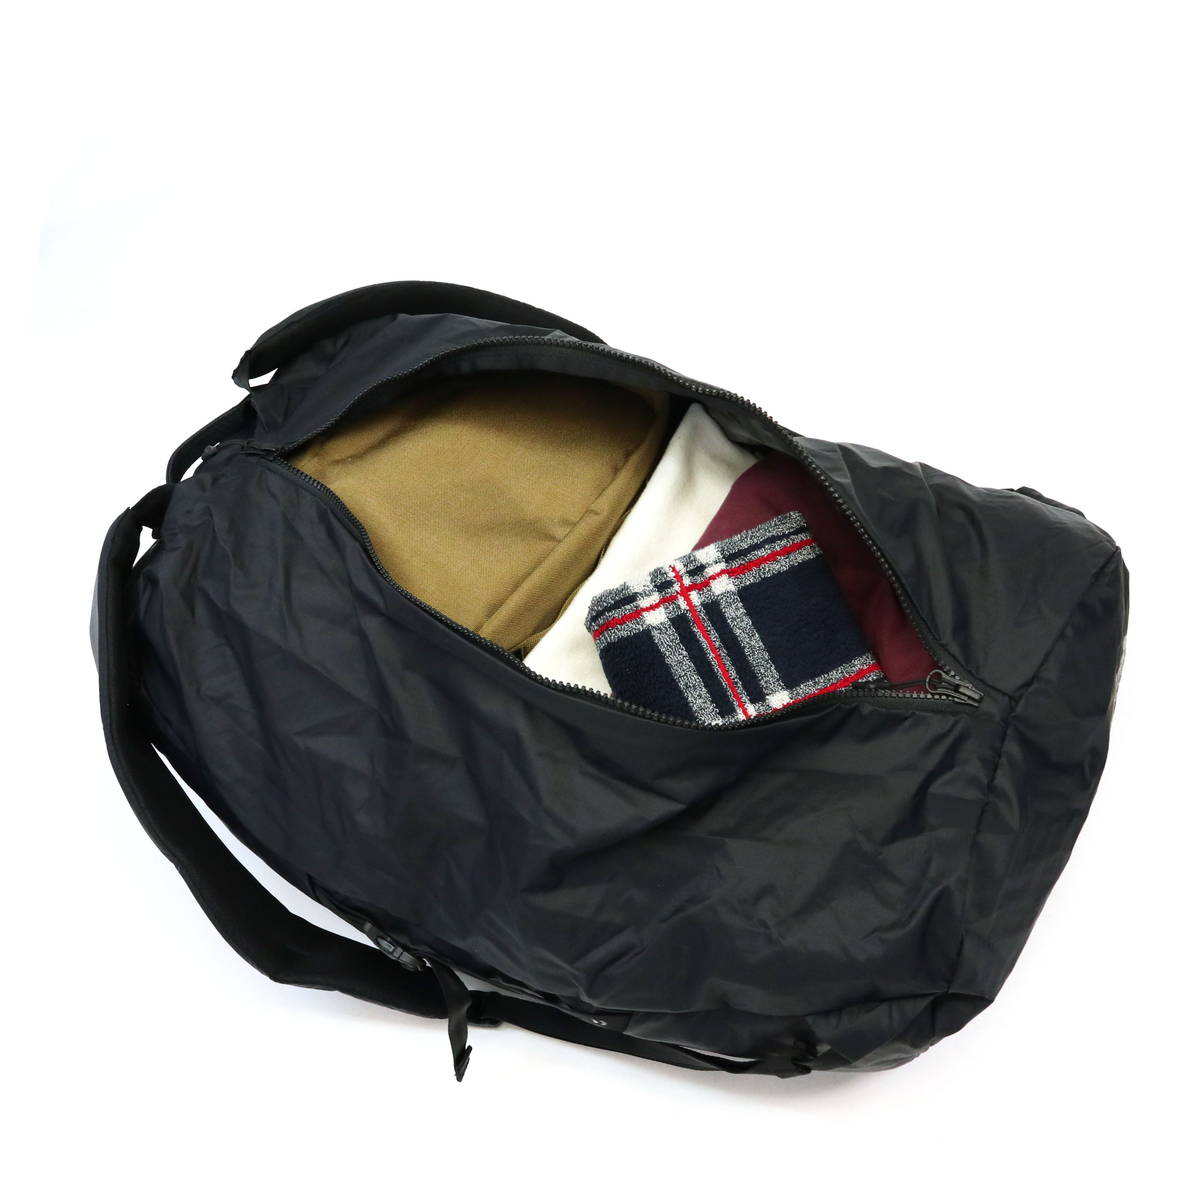 2254.THE NORTH FACE GLAM DUFFEL 35L